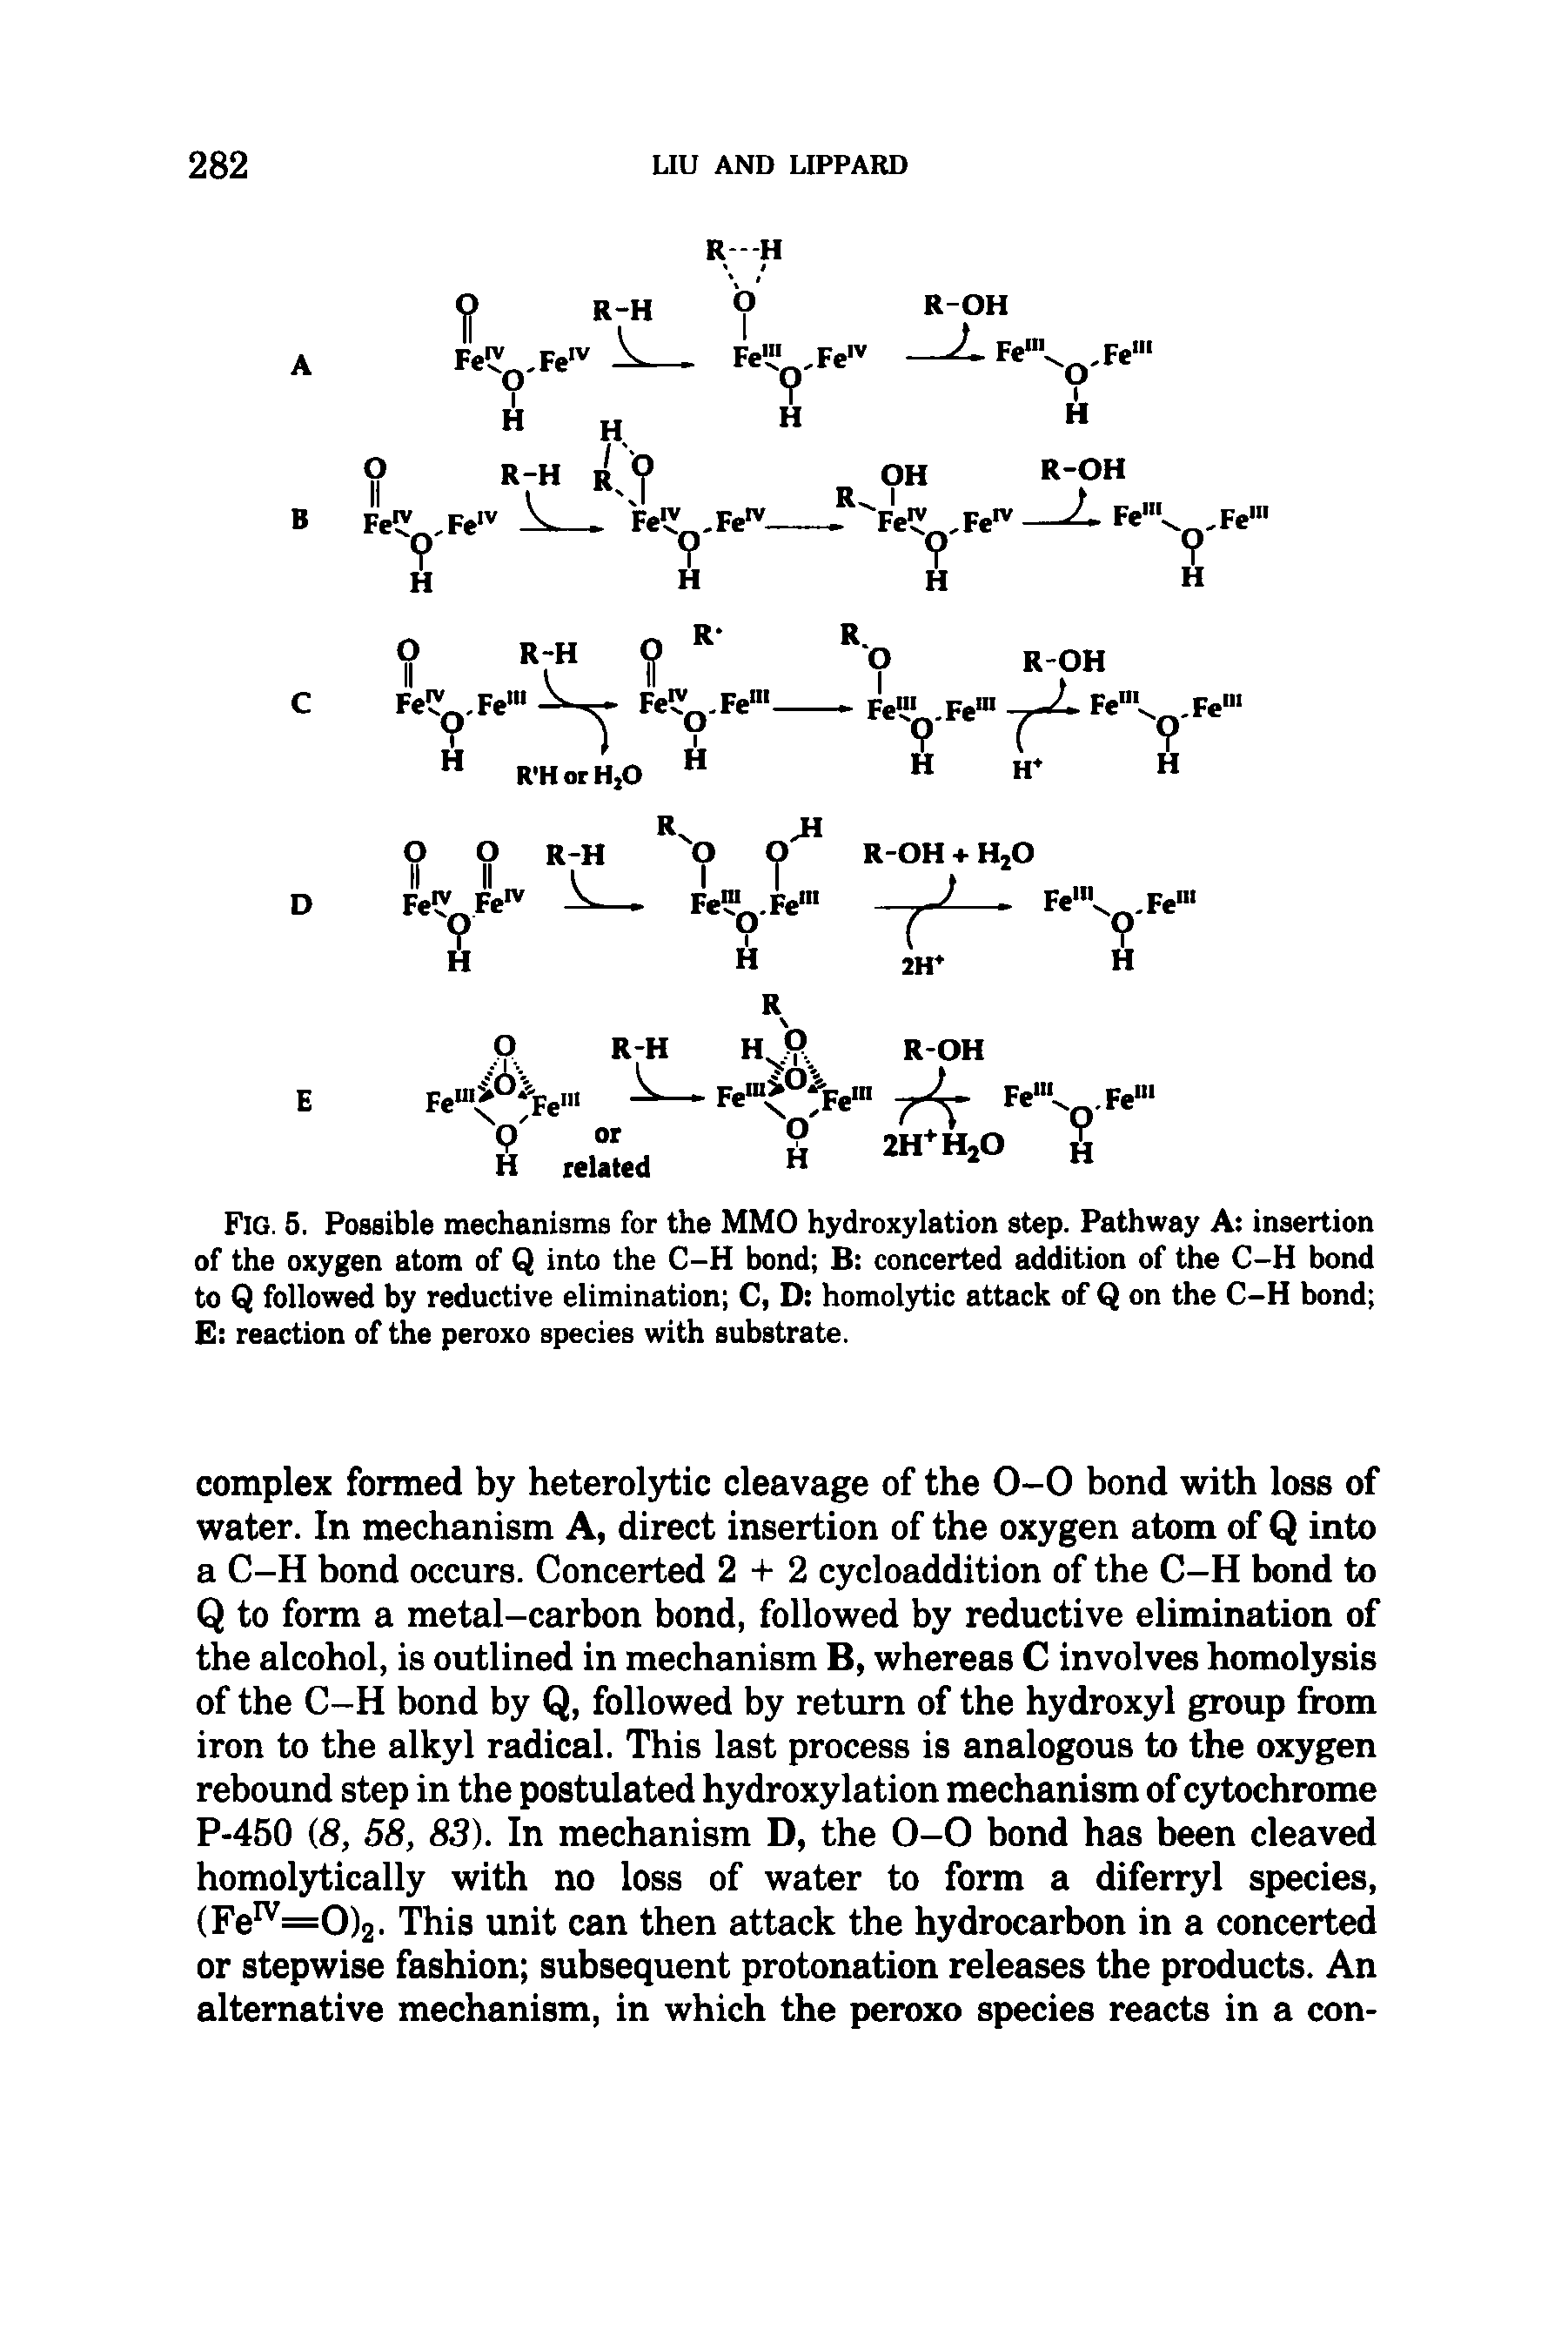 Fig. 5. Possible mechanisms for the MMO hydroxylation step. Pathway A insertion of the oxygen atom of Q into the C-H bond B concerted addition of the C-H bond to Q followed by reductive elimination C, D homolytic attack of Q on the C-H bond E reaction of the peroxo species with substrate.